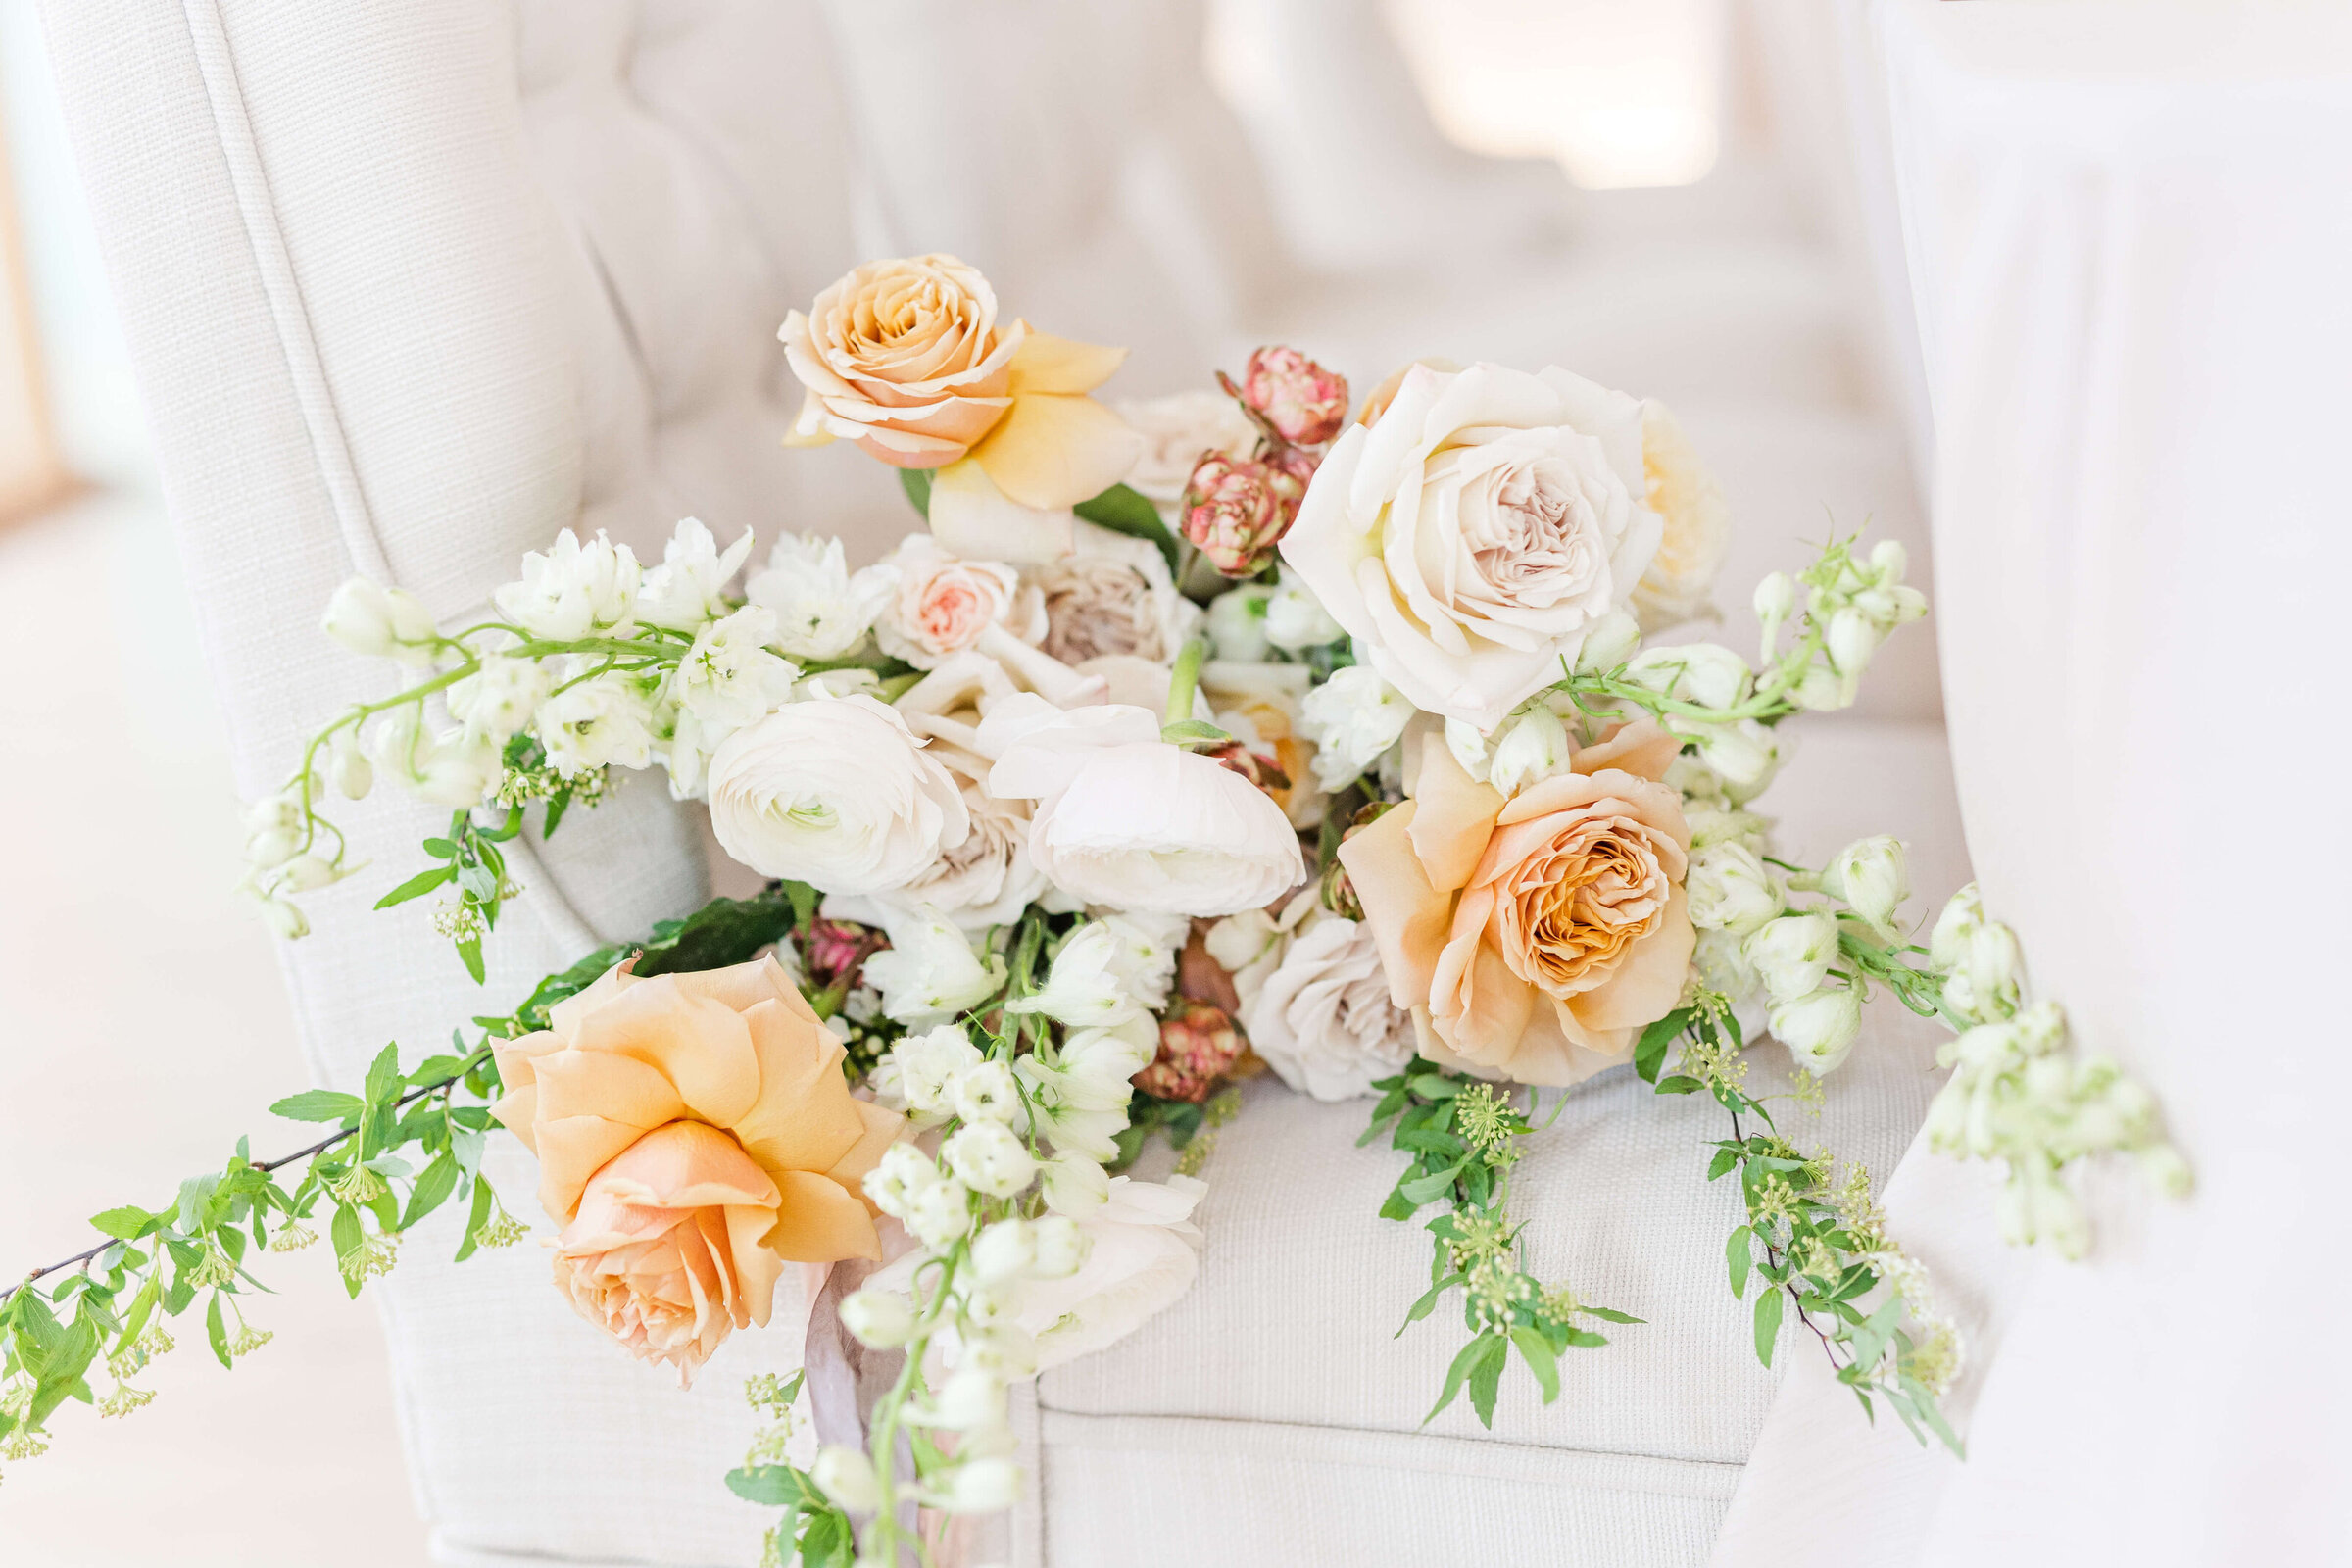 A floral bouquet sitting on a white linen chair at a wedding